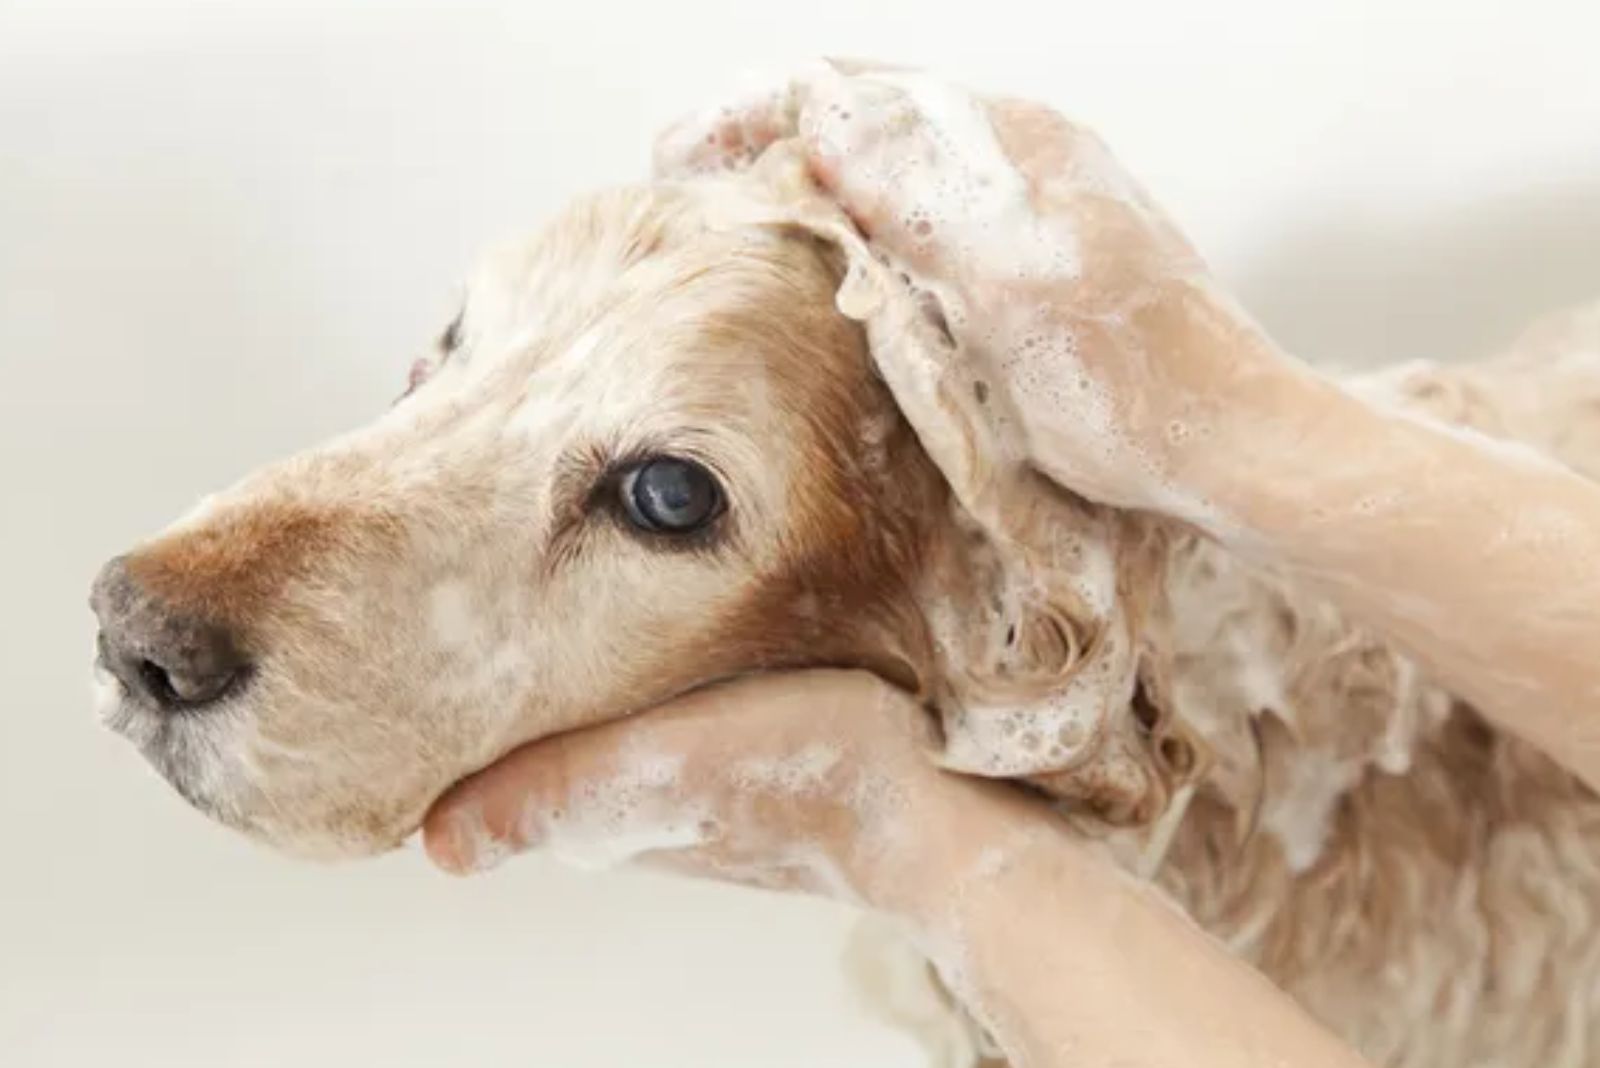 bathing the dog with soap